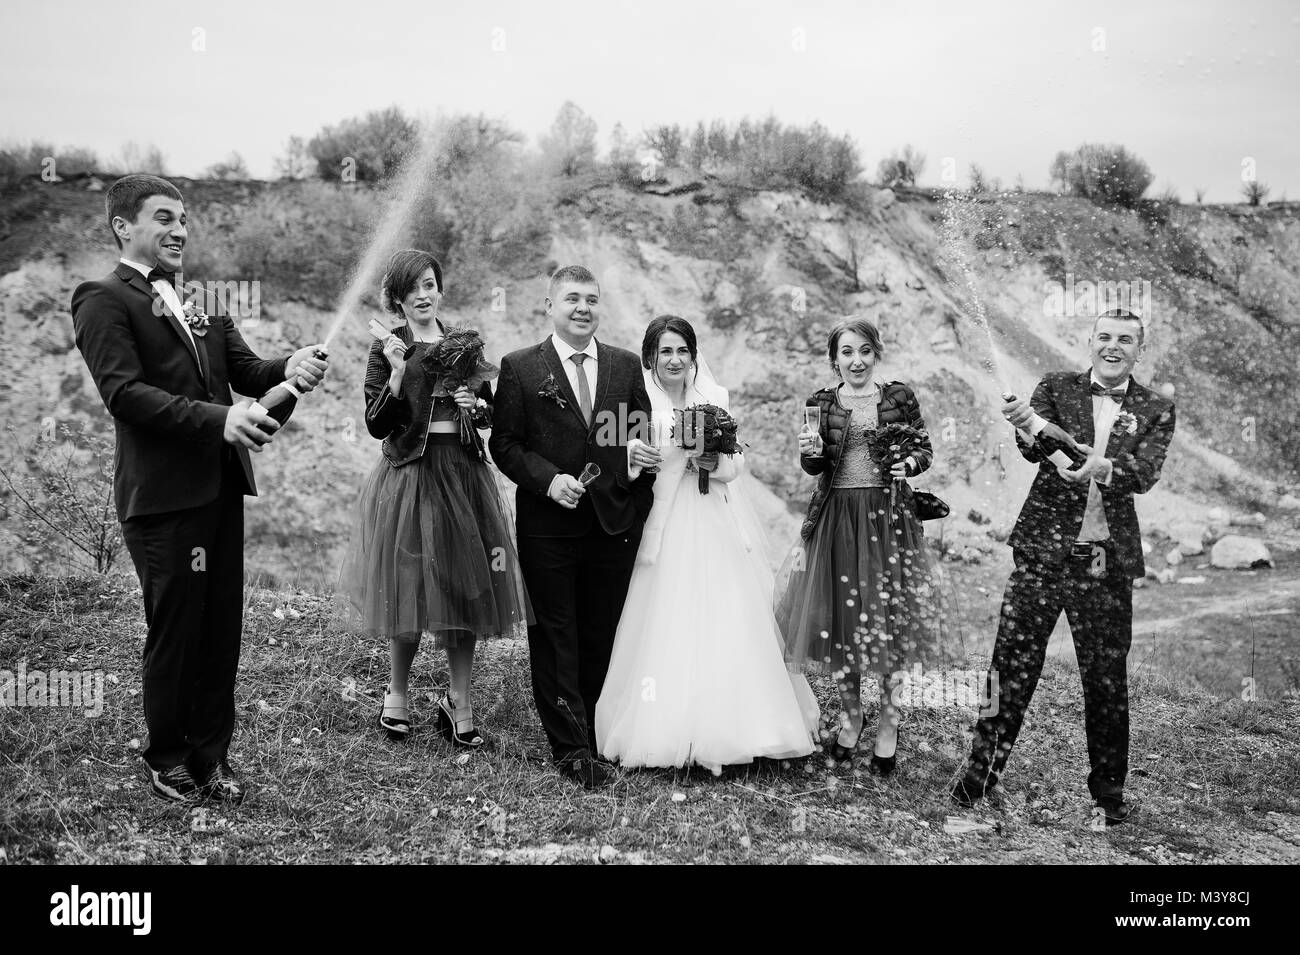 Wedding couple, groomsman and bridesmaids looking at best man opening the champagne bottle in sand quarry. Black and white photo. Stock Photo